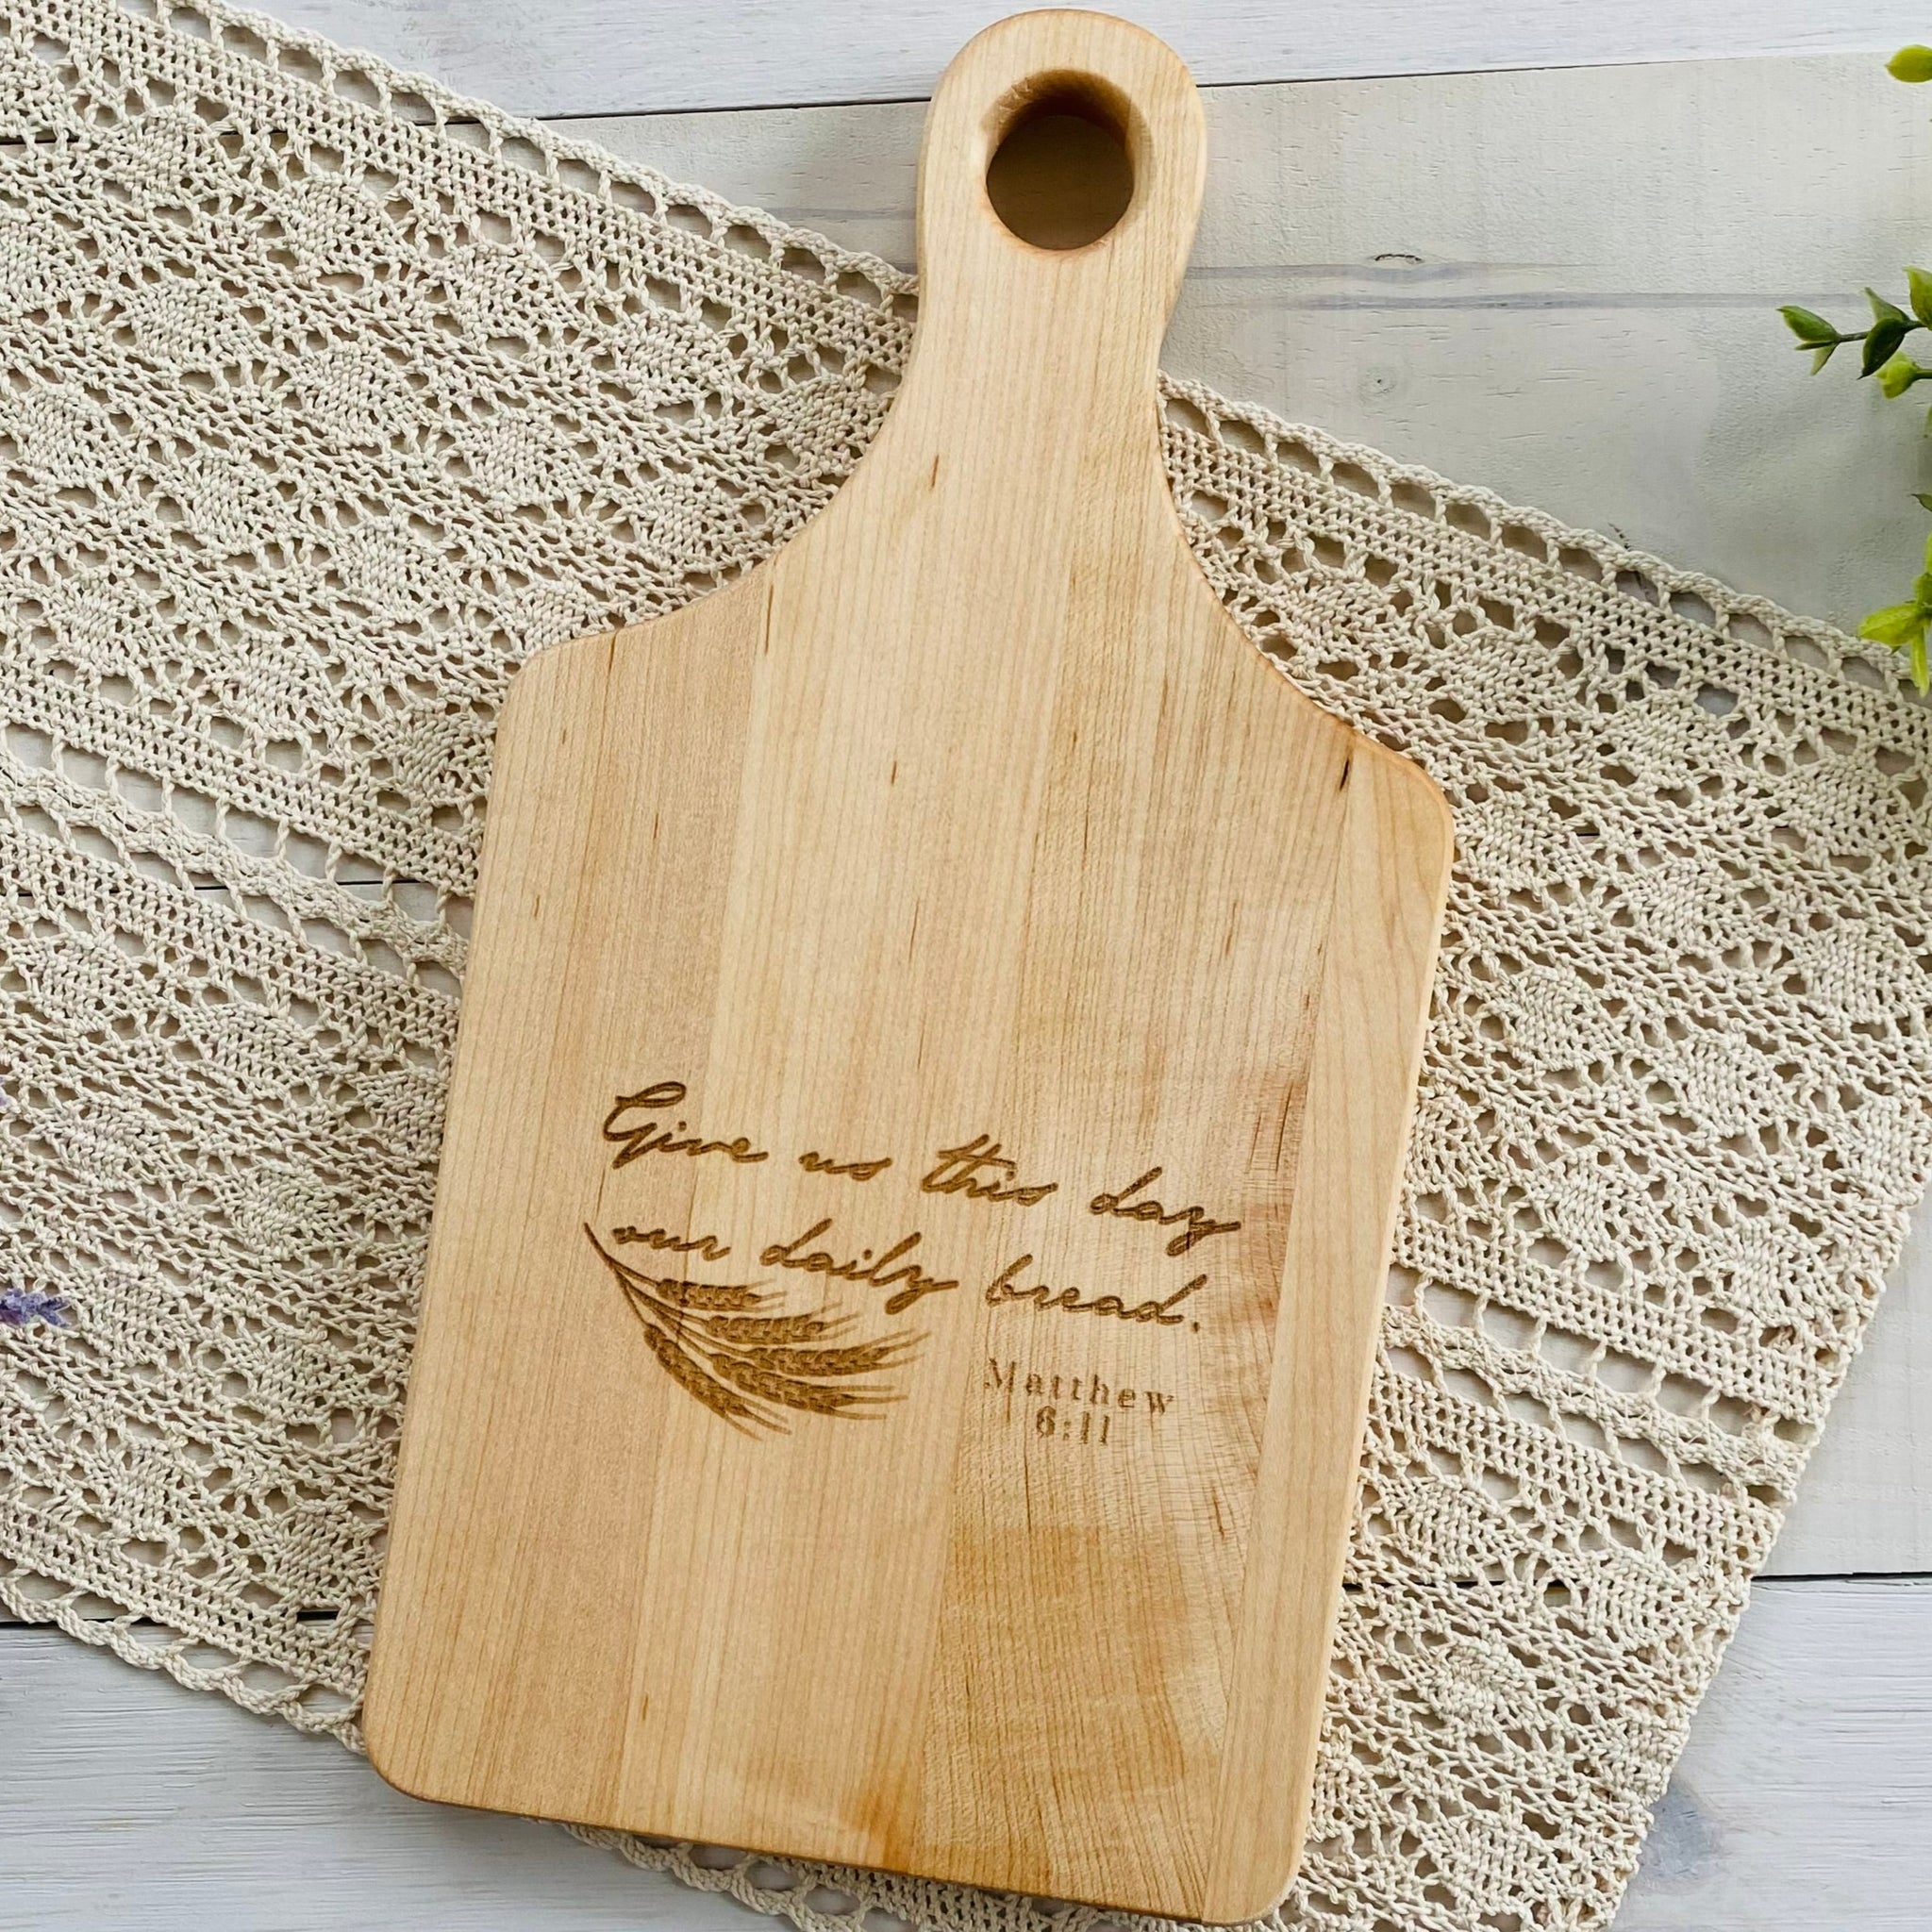 Give Us This Day Our Daily Bread Cutting Board